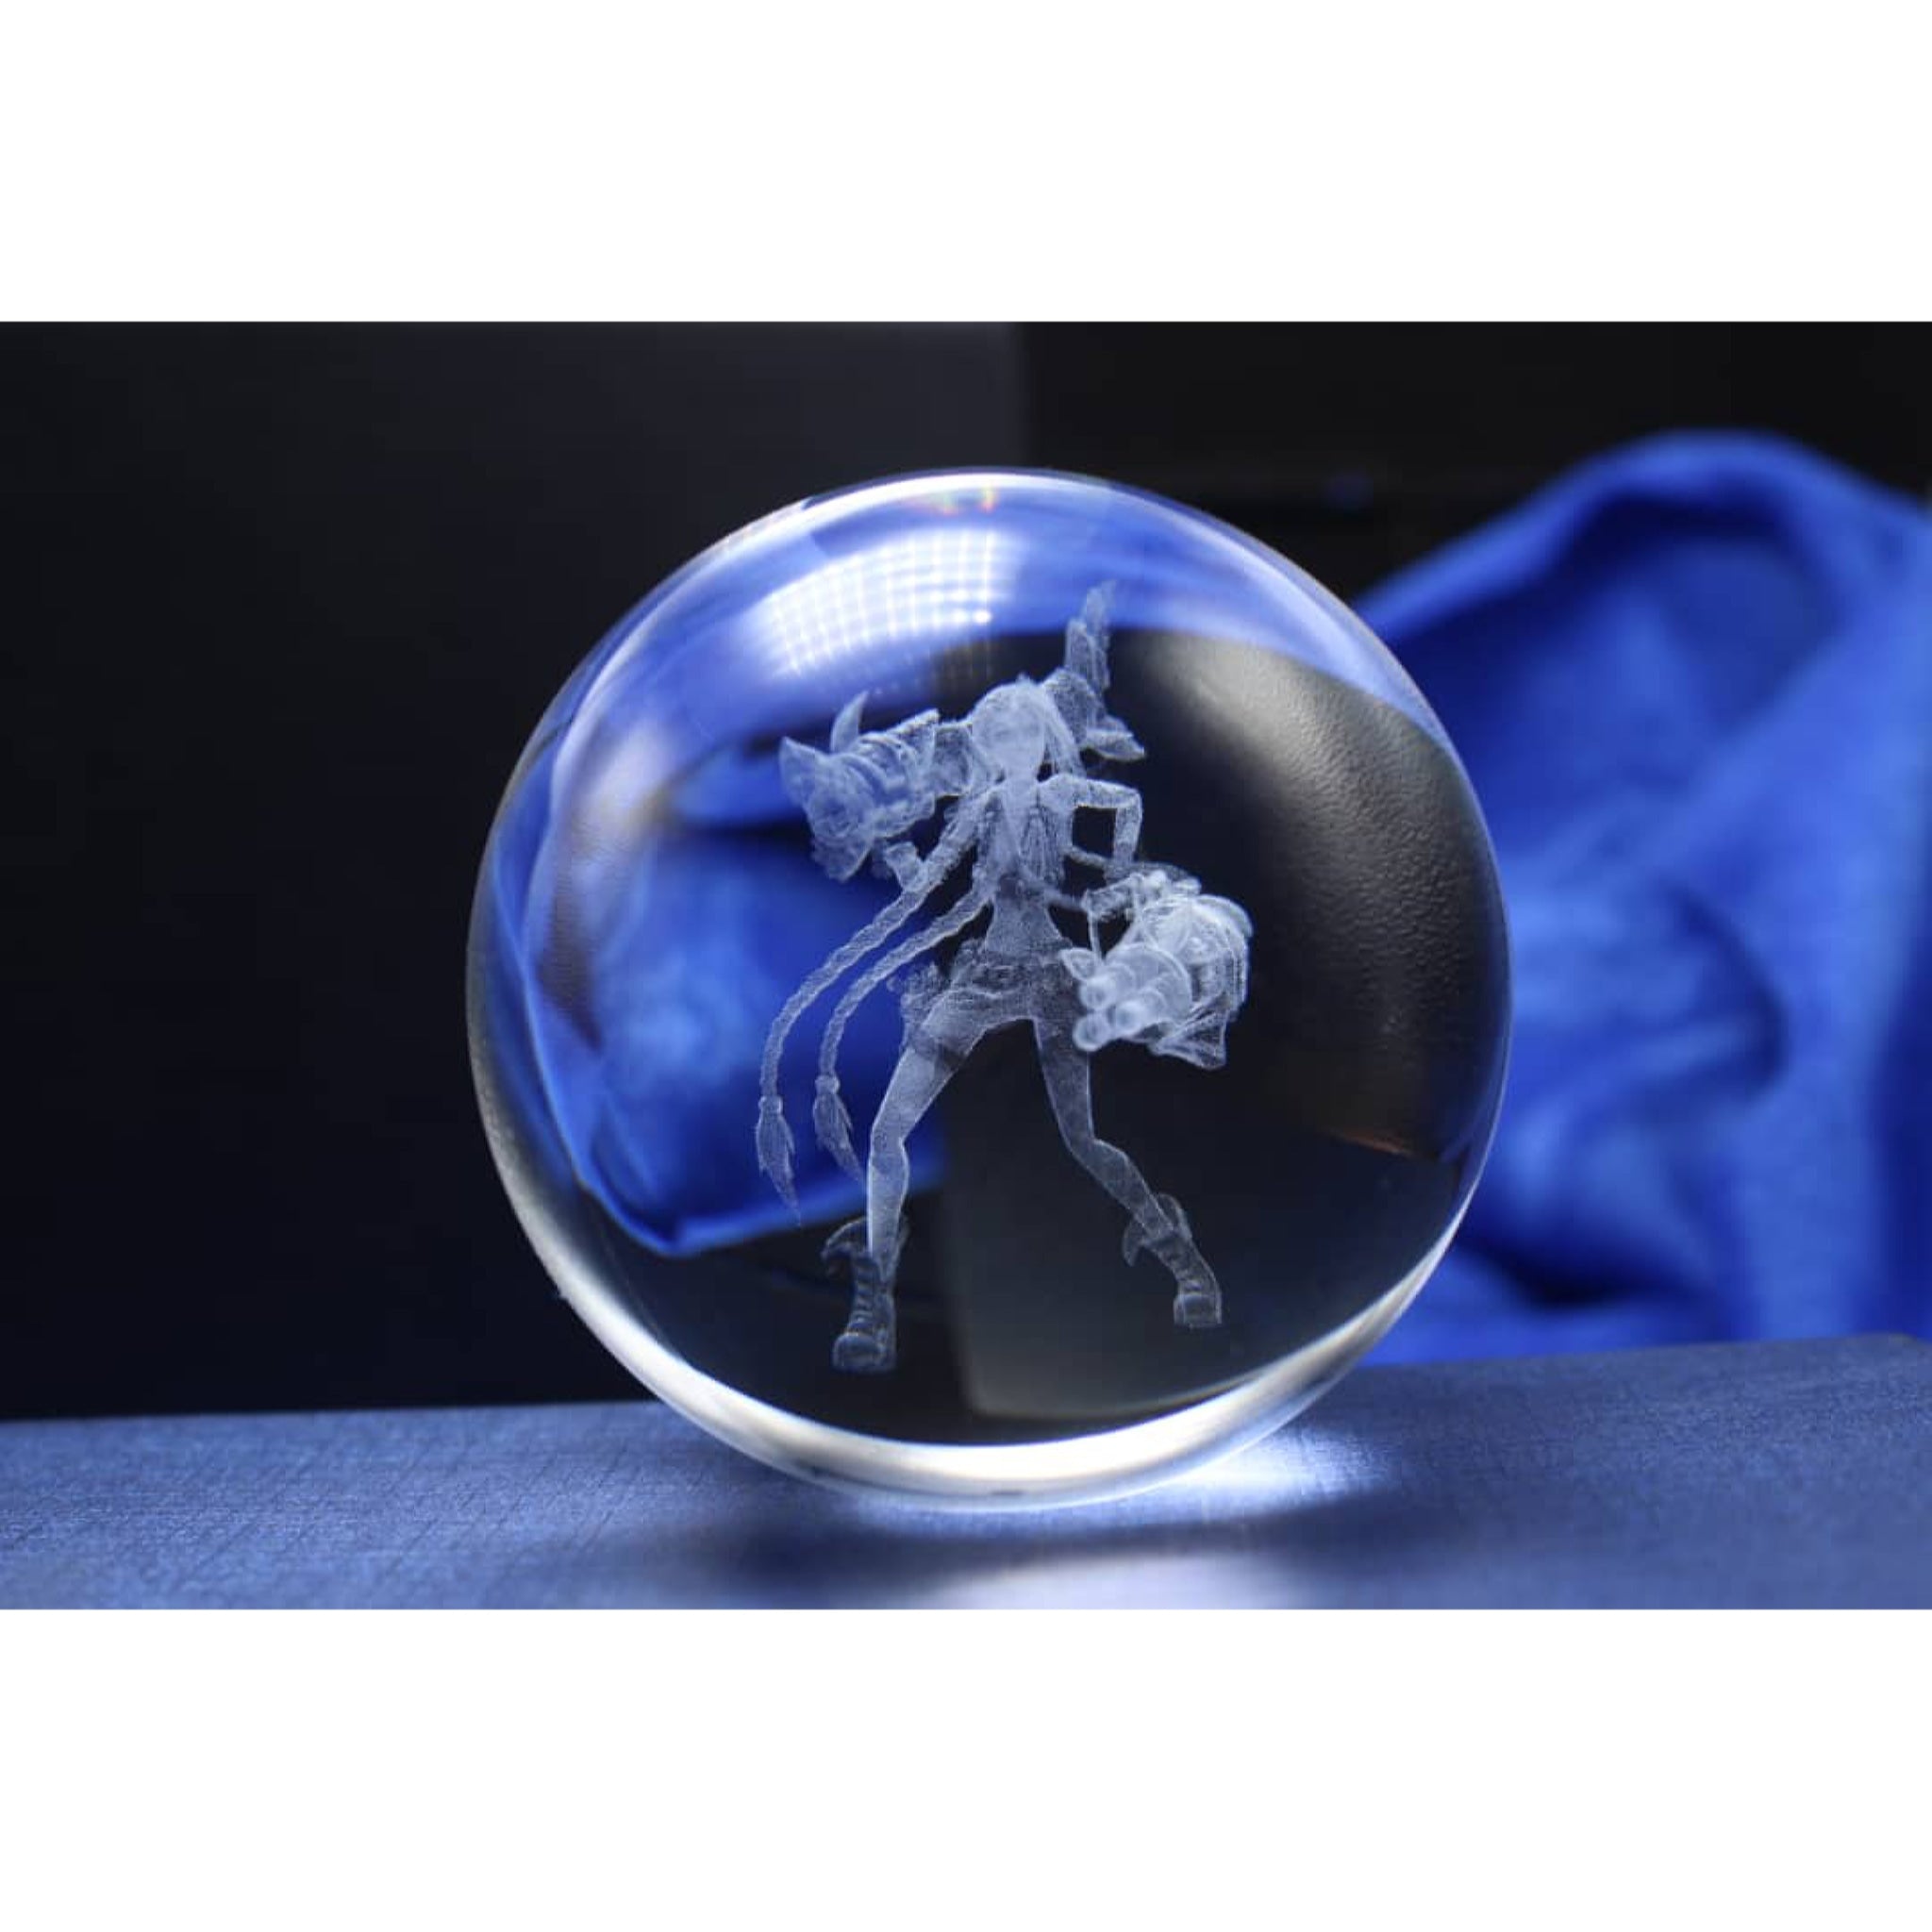 Jinx Character Glass Crystal Ball 61 with Light-Up LED Base Ornament 80mm XL Size